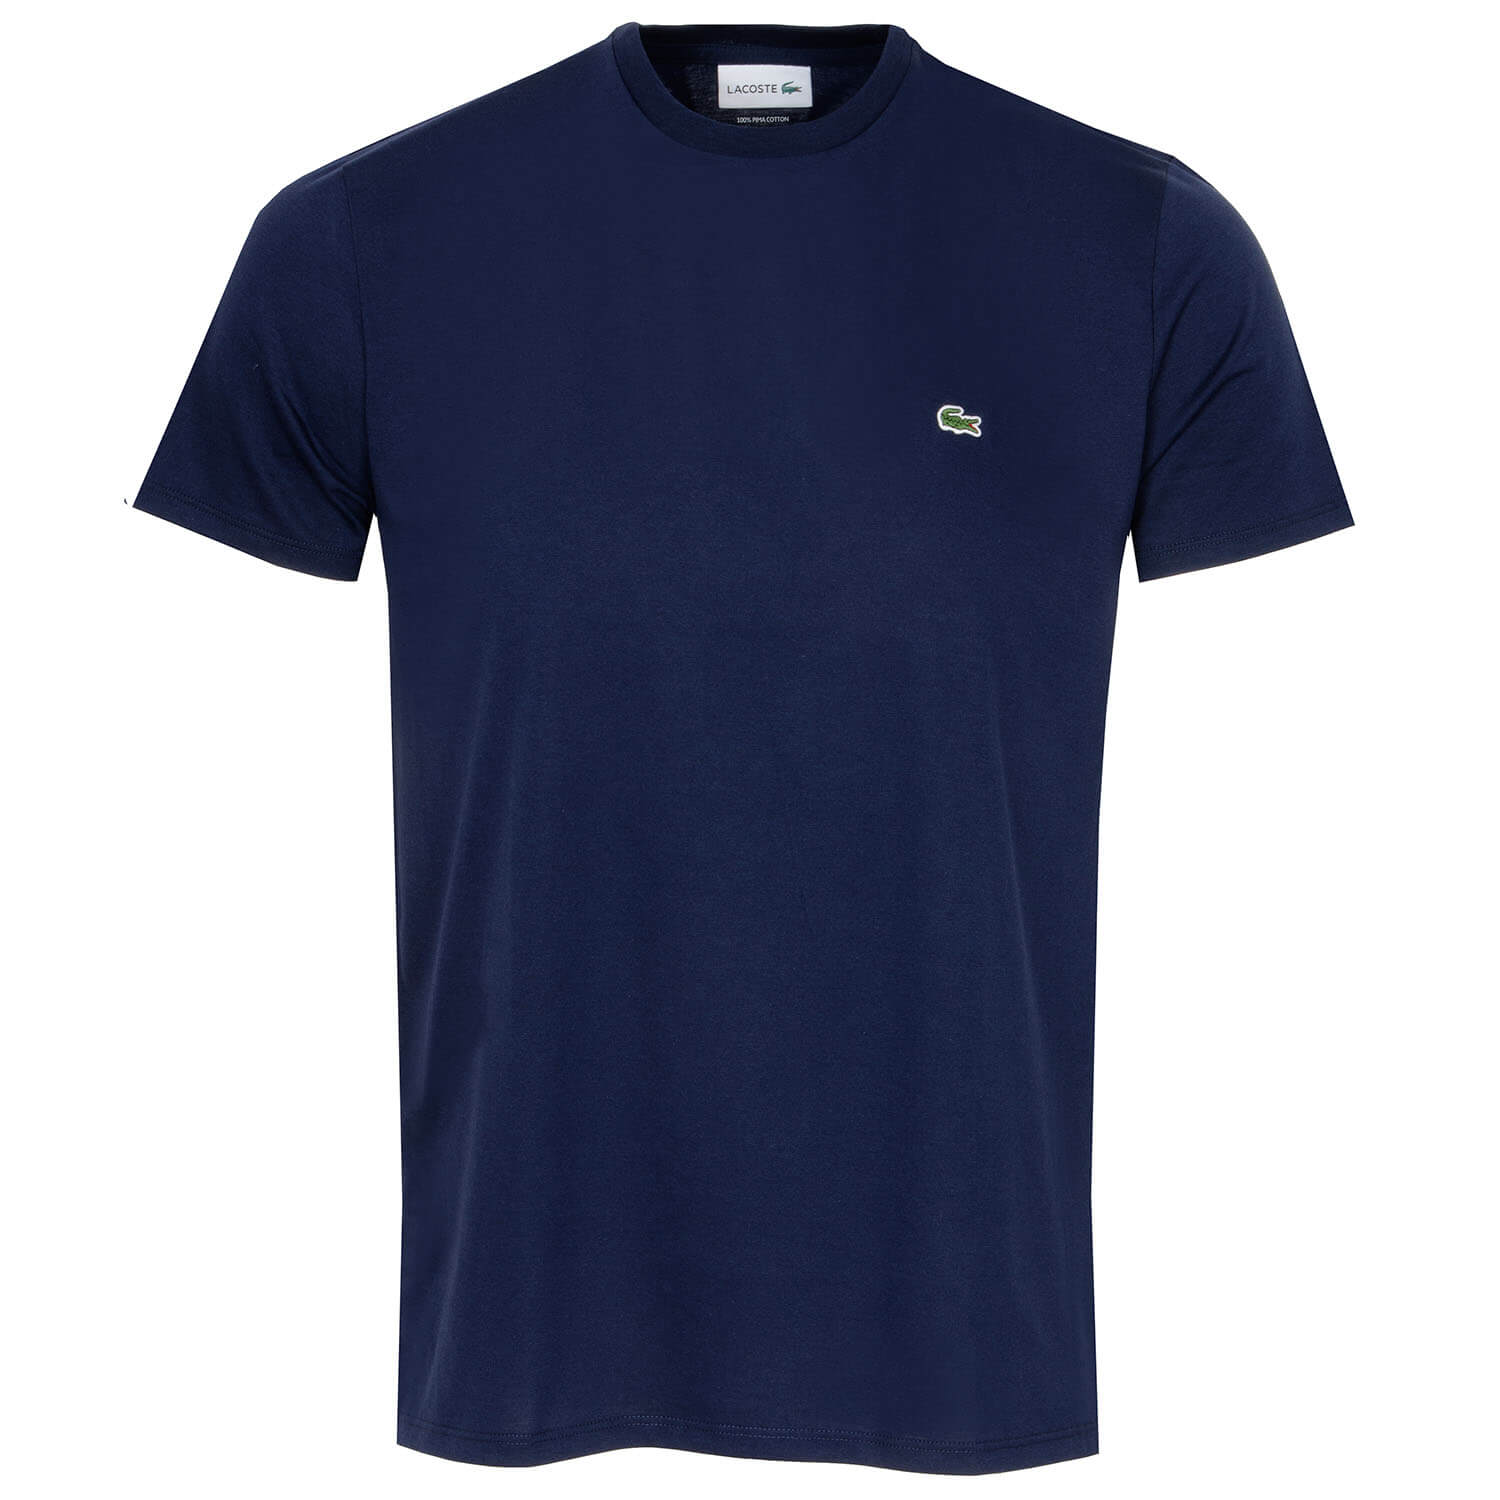 Lacoste Classic Tee Shirt